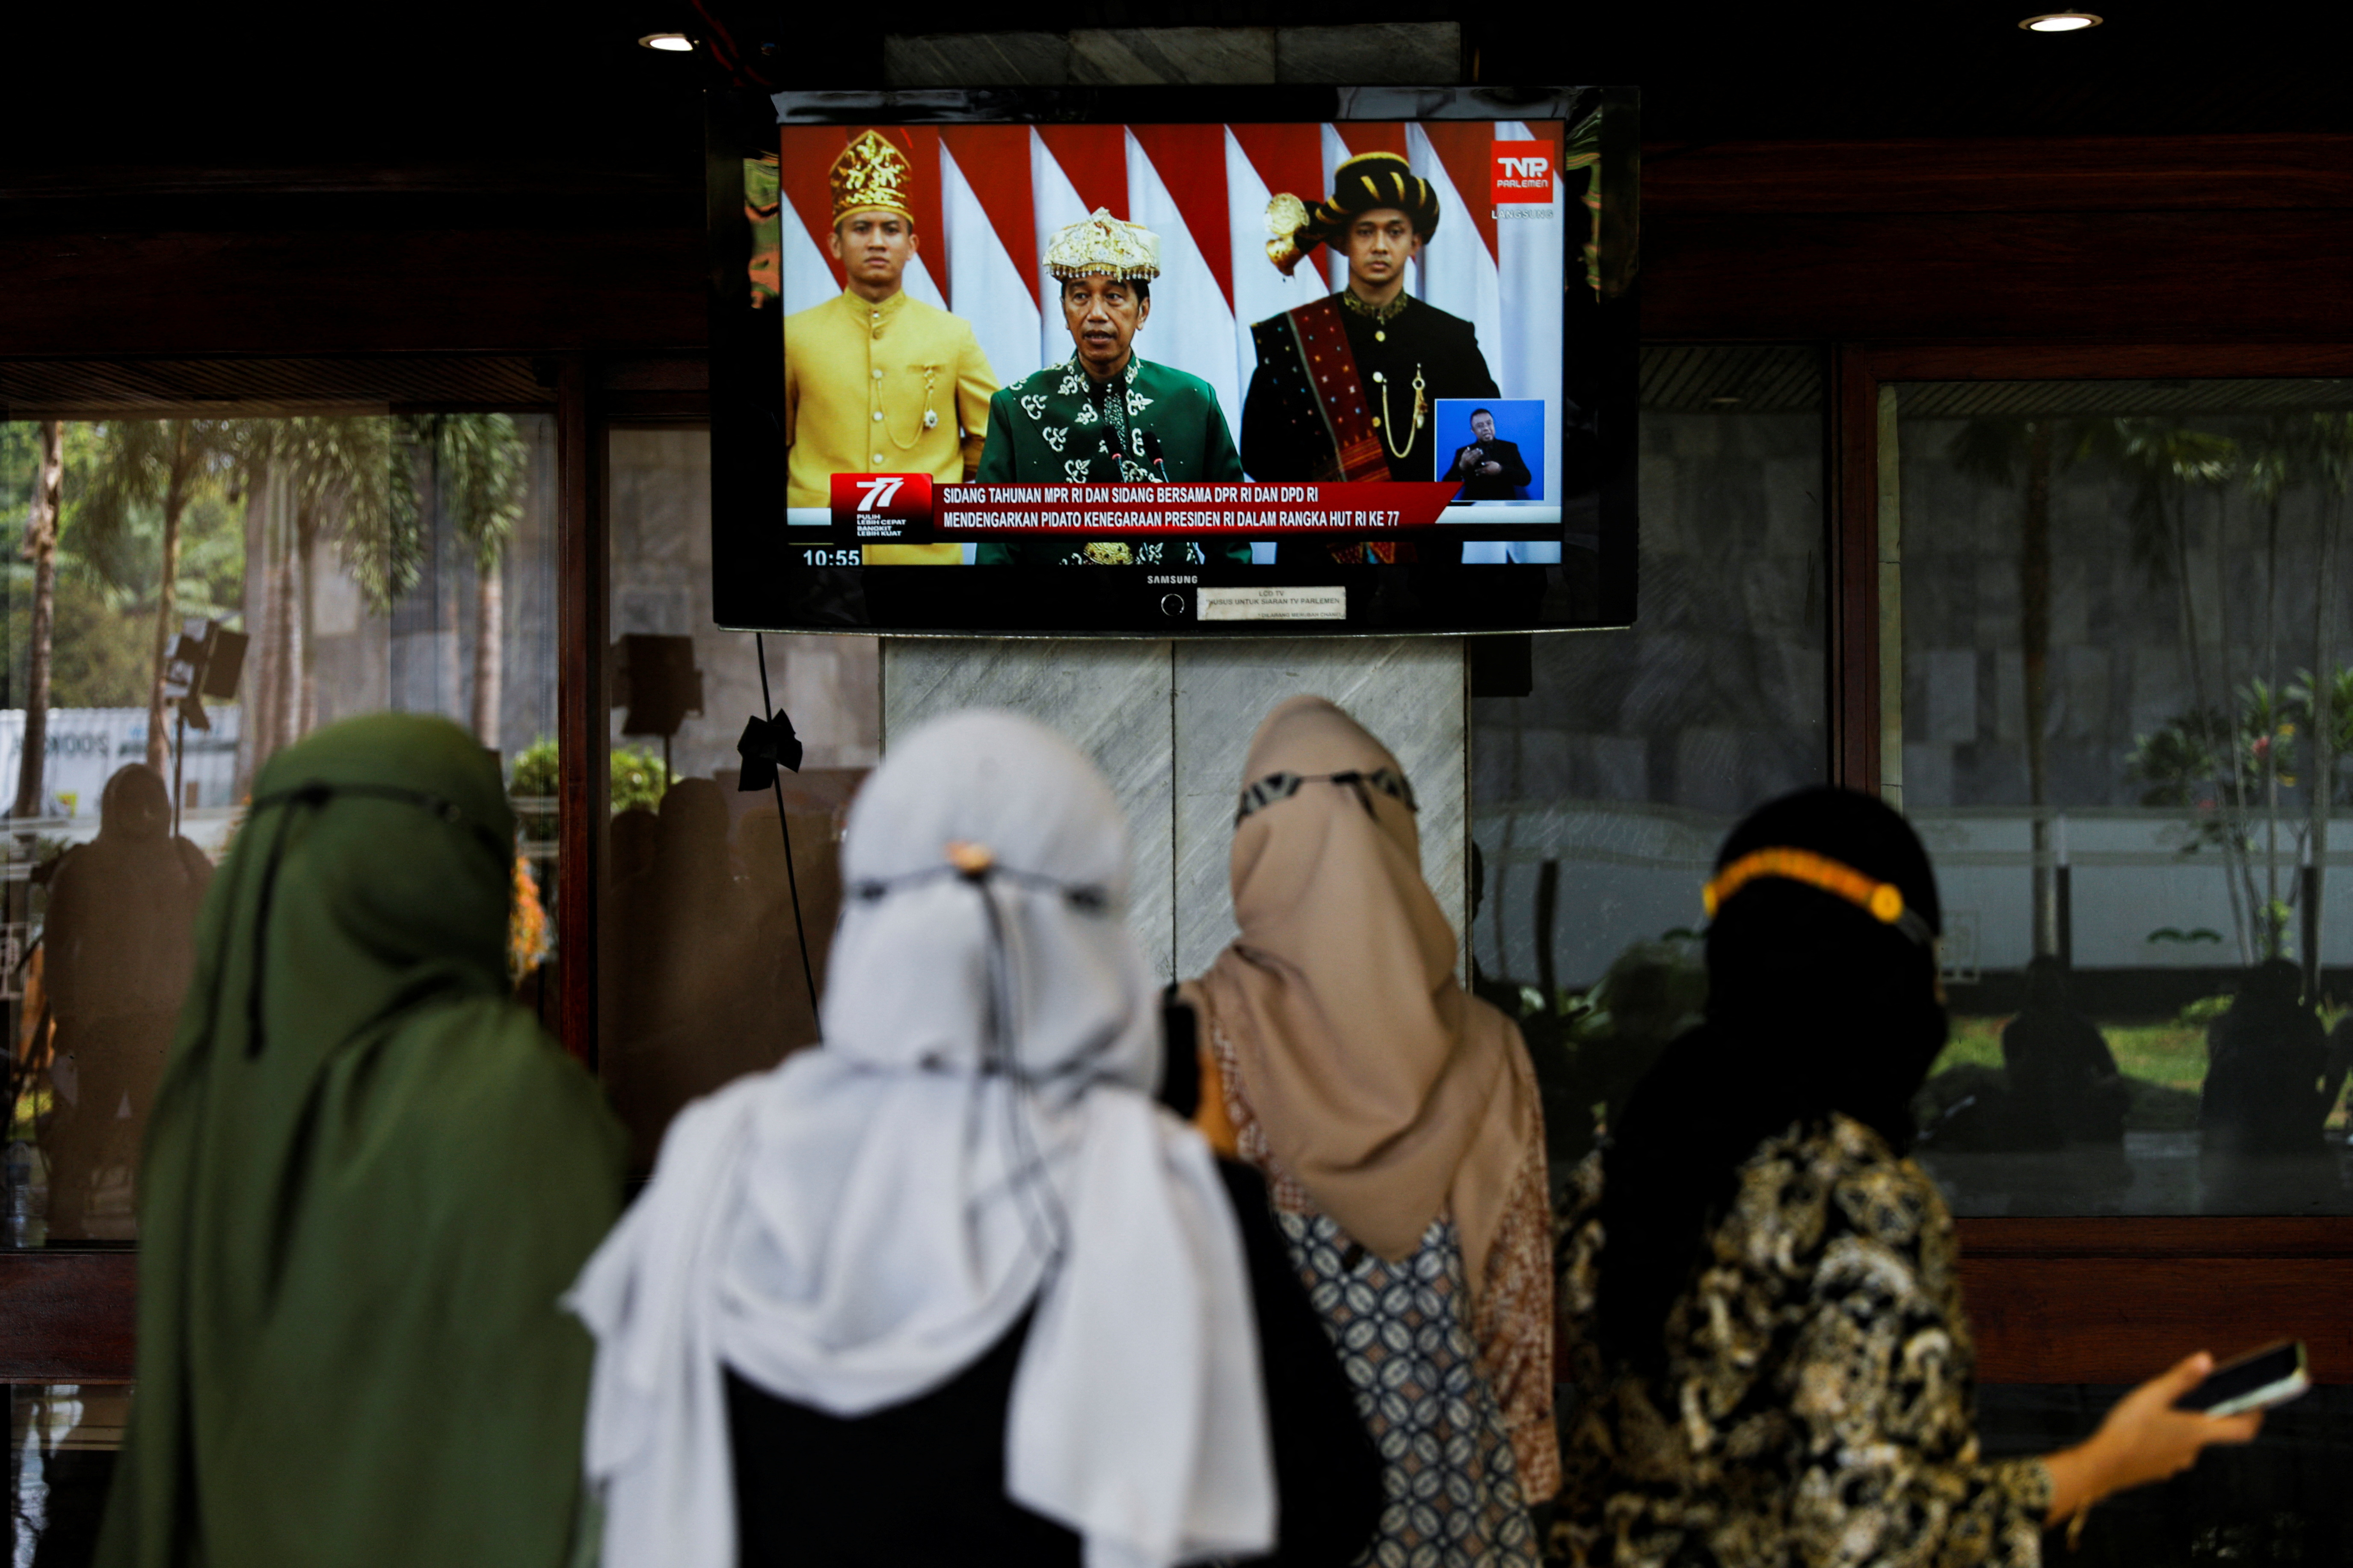 Annual State of the Nation Address ahead of Indonesia's Independence Day